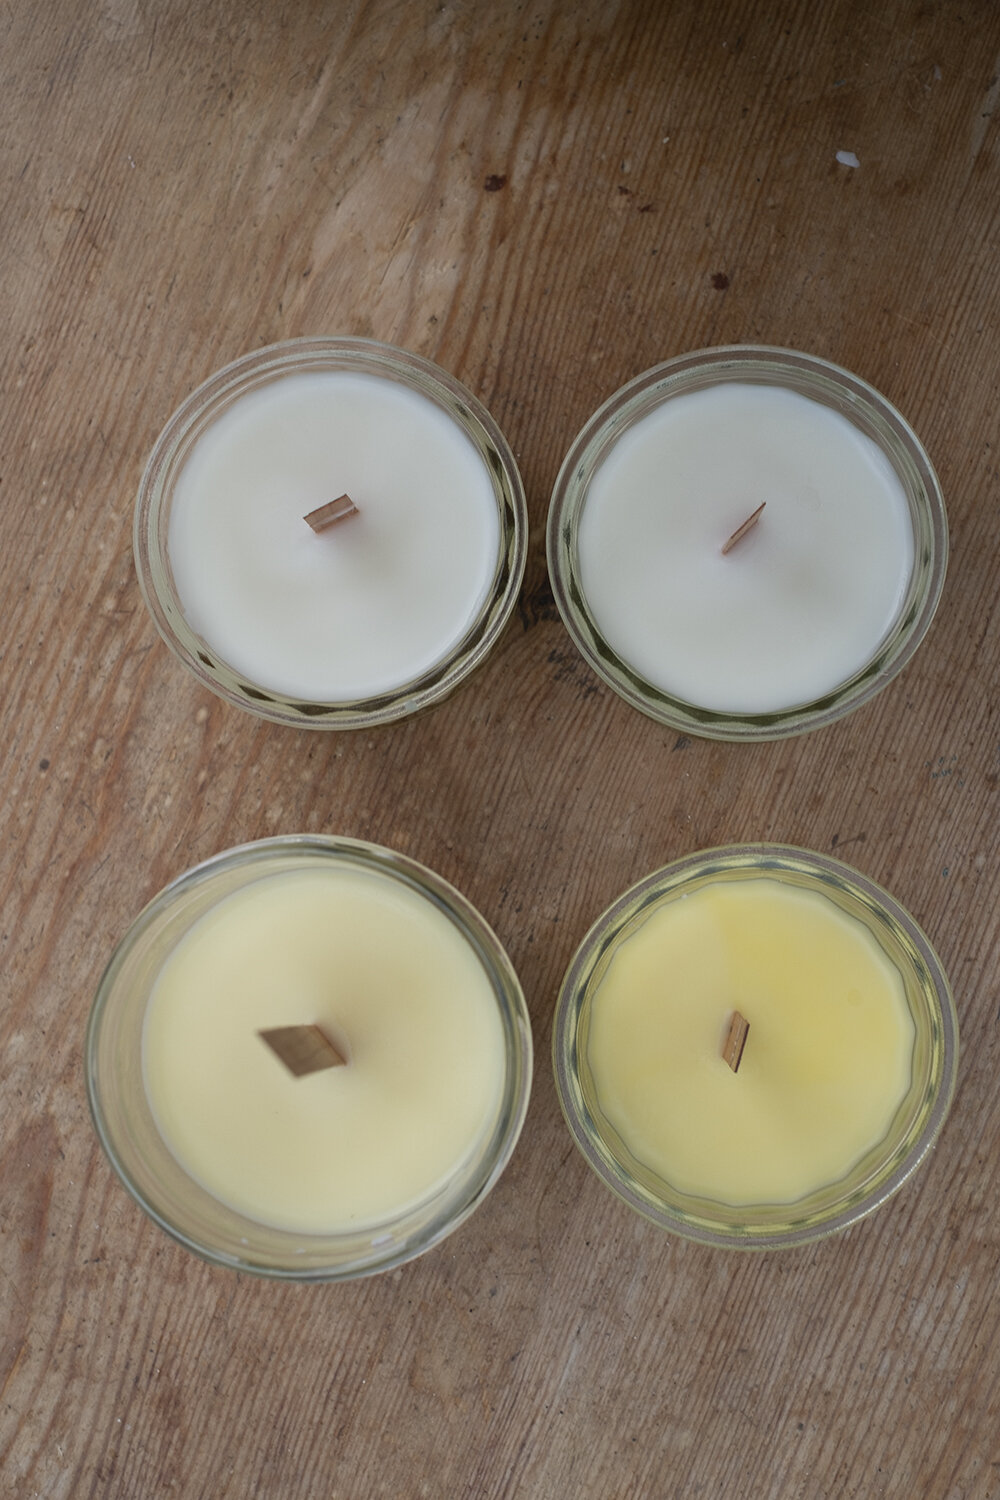 How to make your own candles